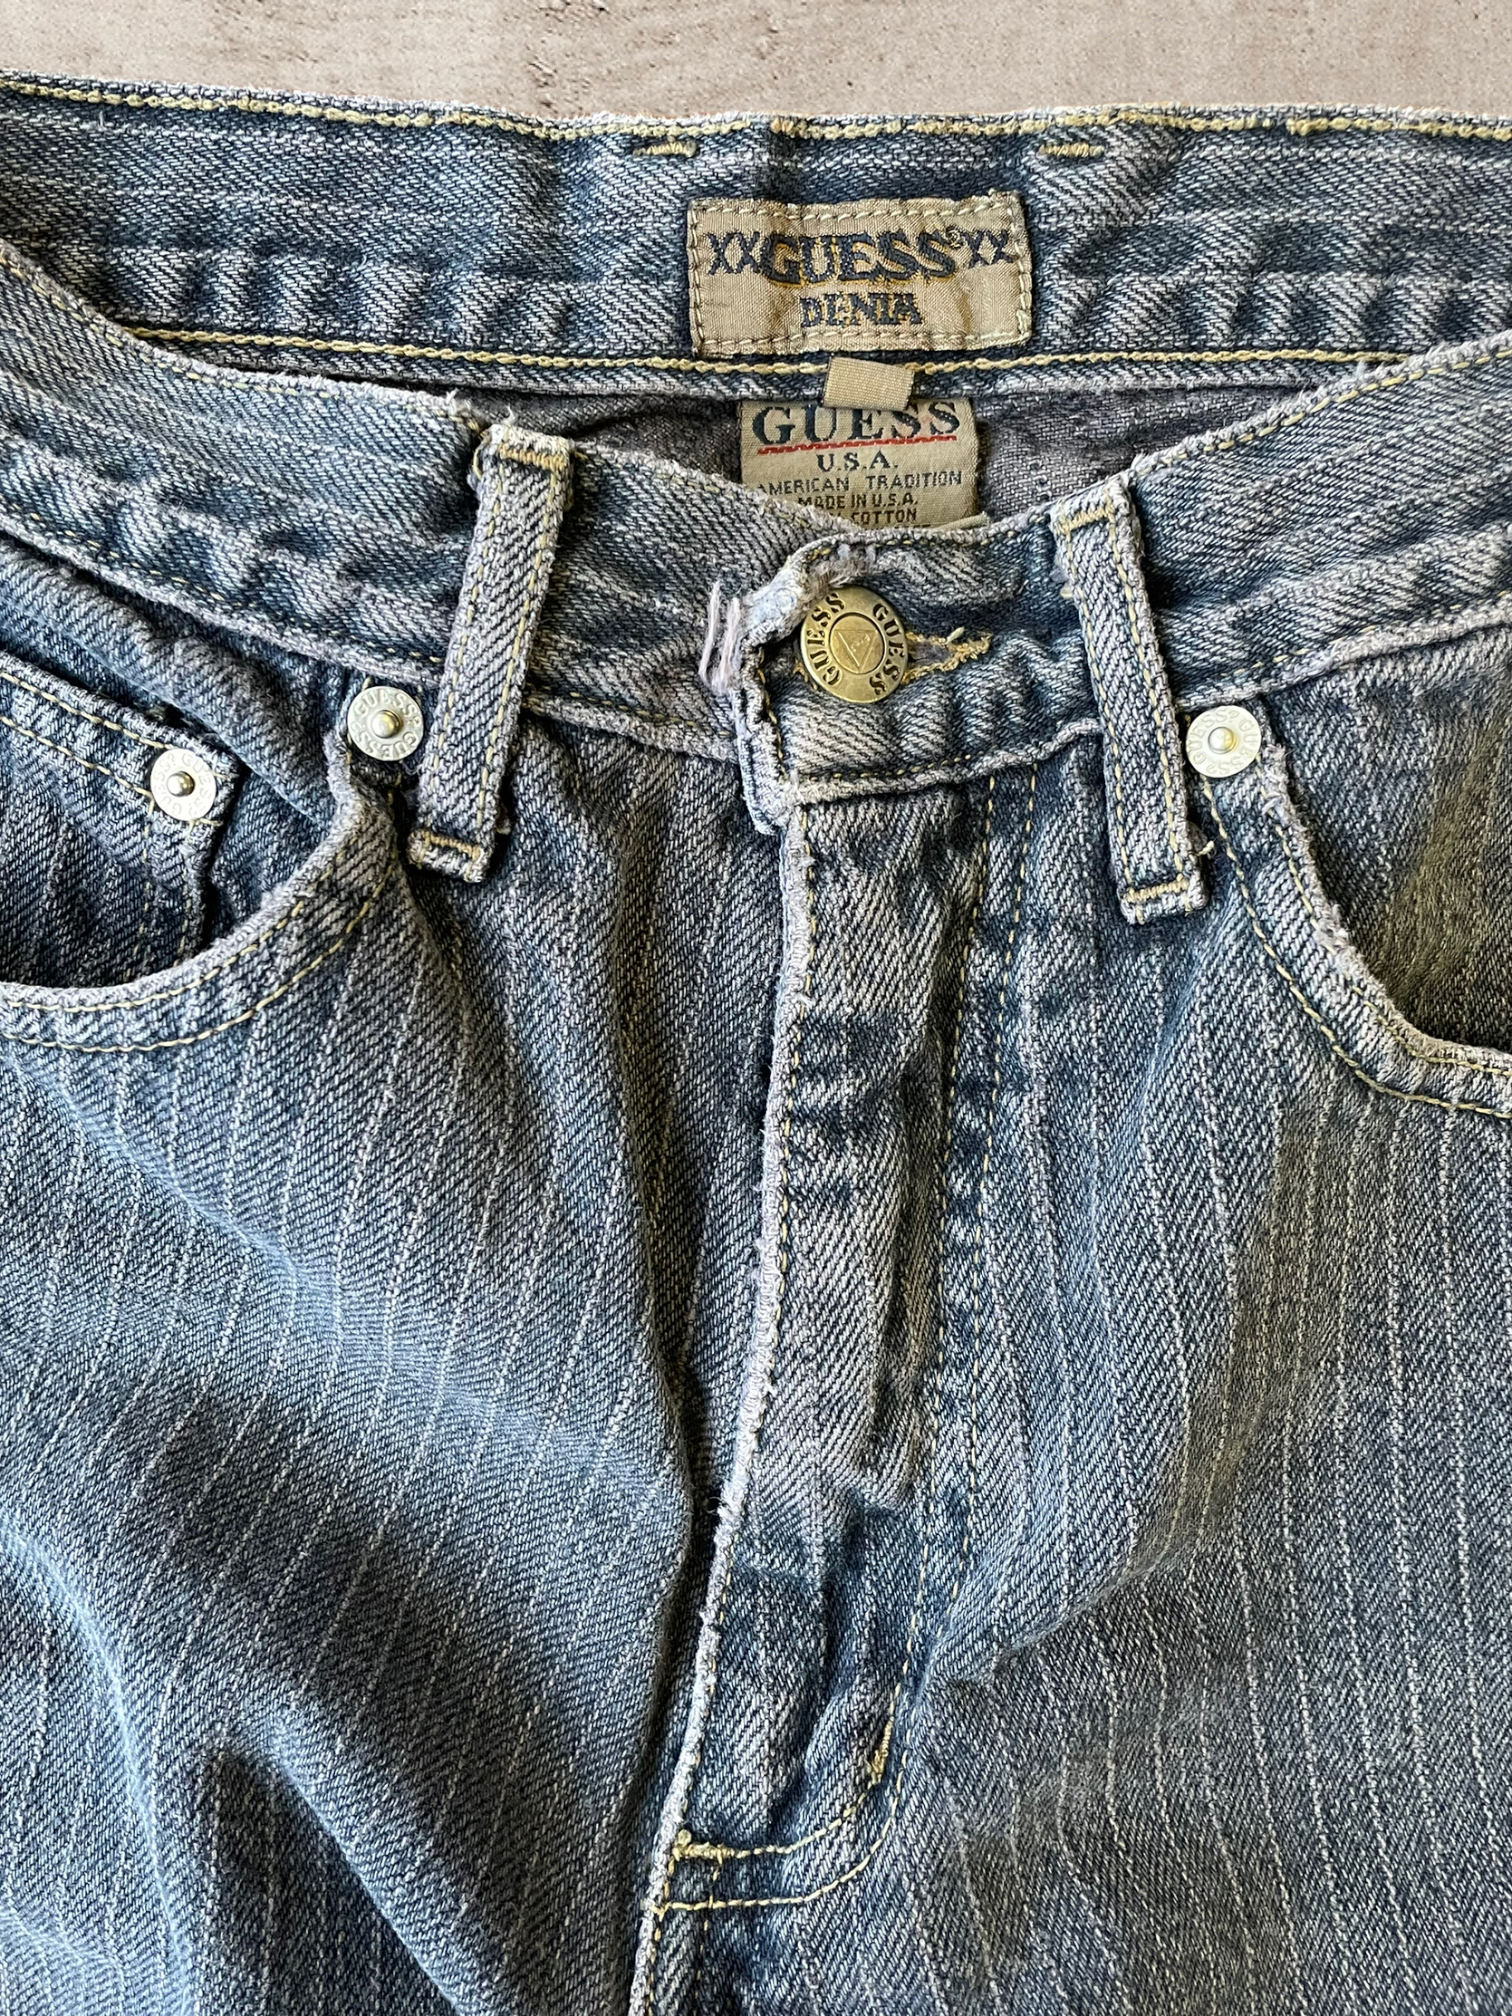 90s Guess Stripped Jeans - 27x26